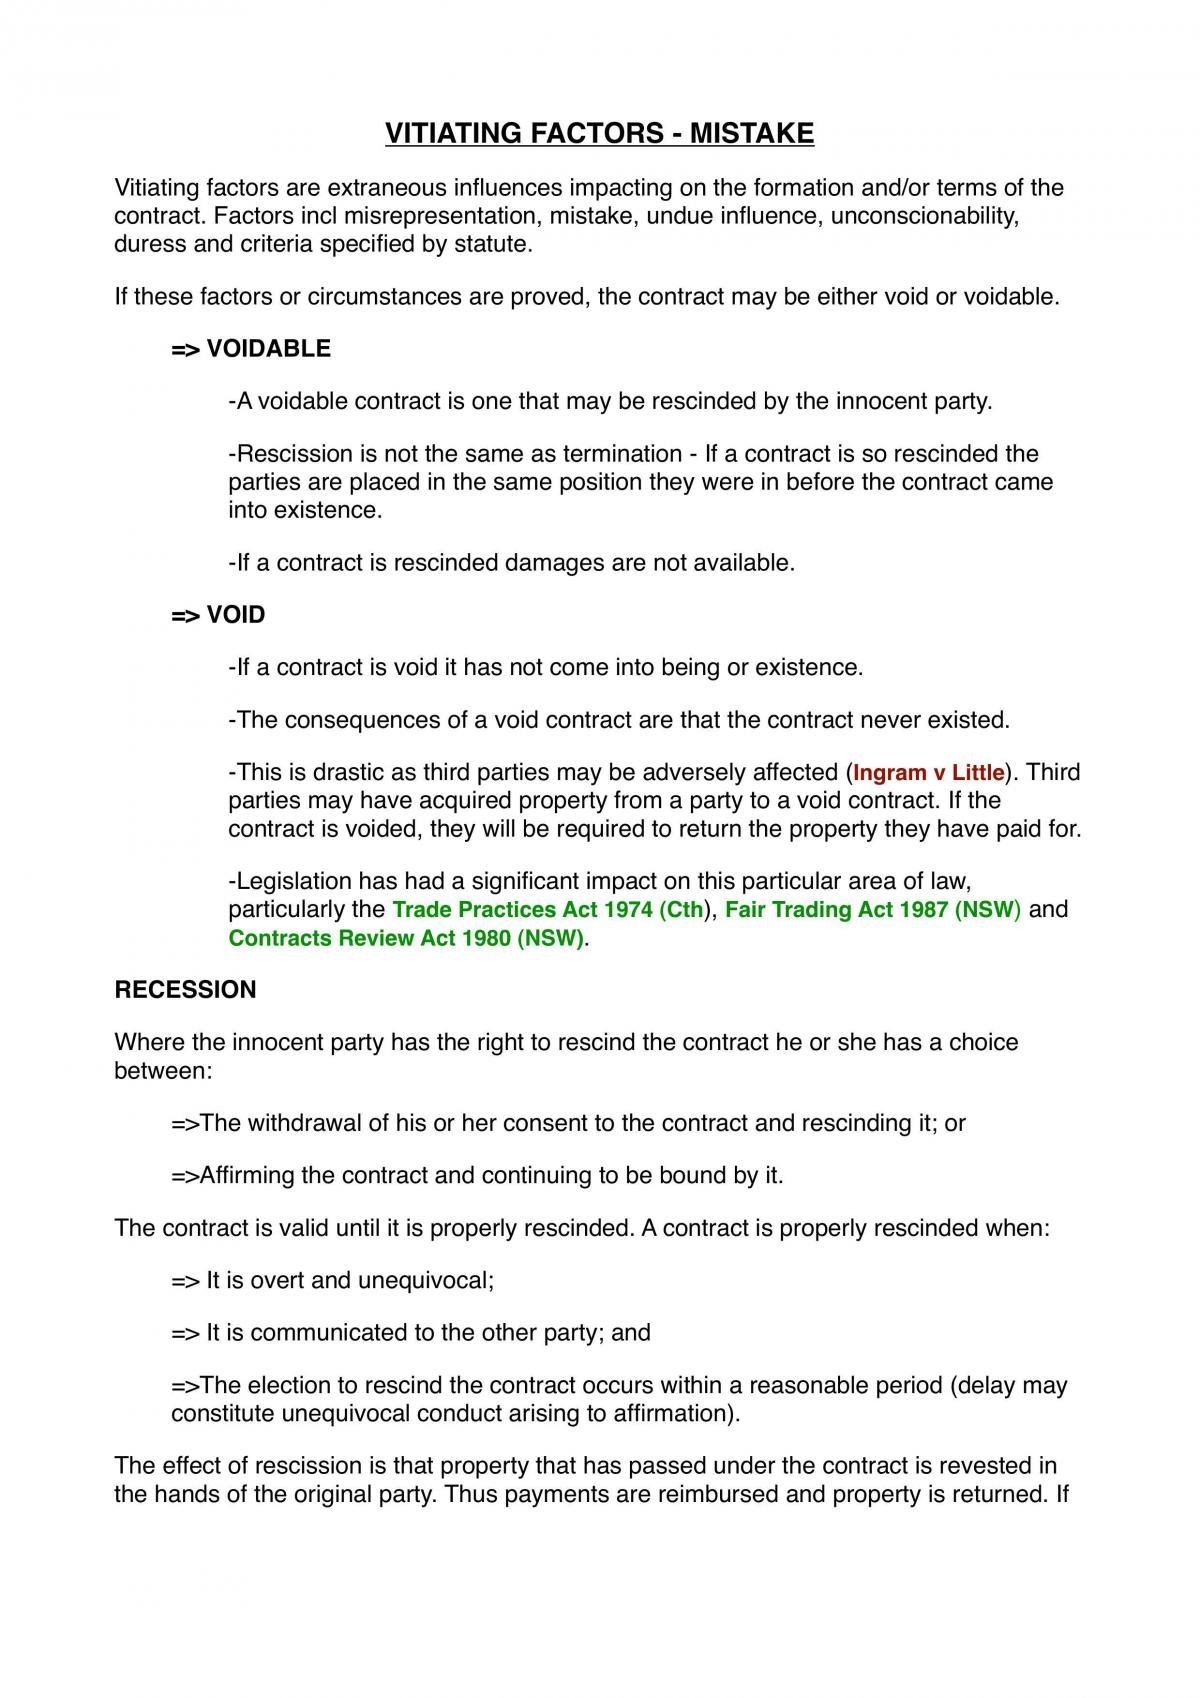 Complete Exam Notes Including Case Summaries - Page 63